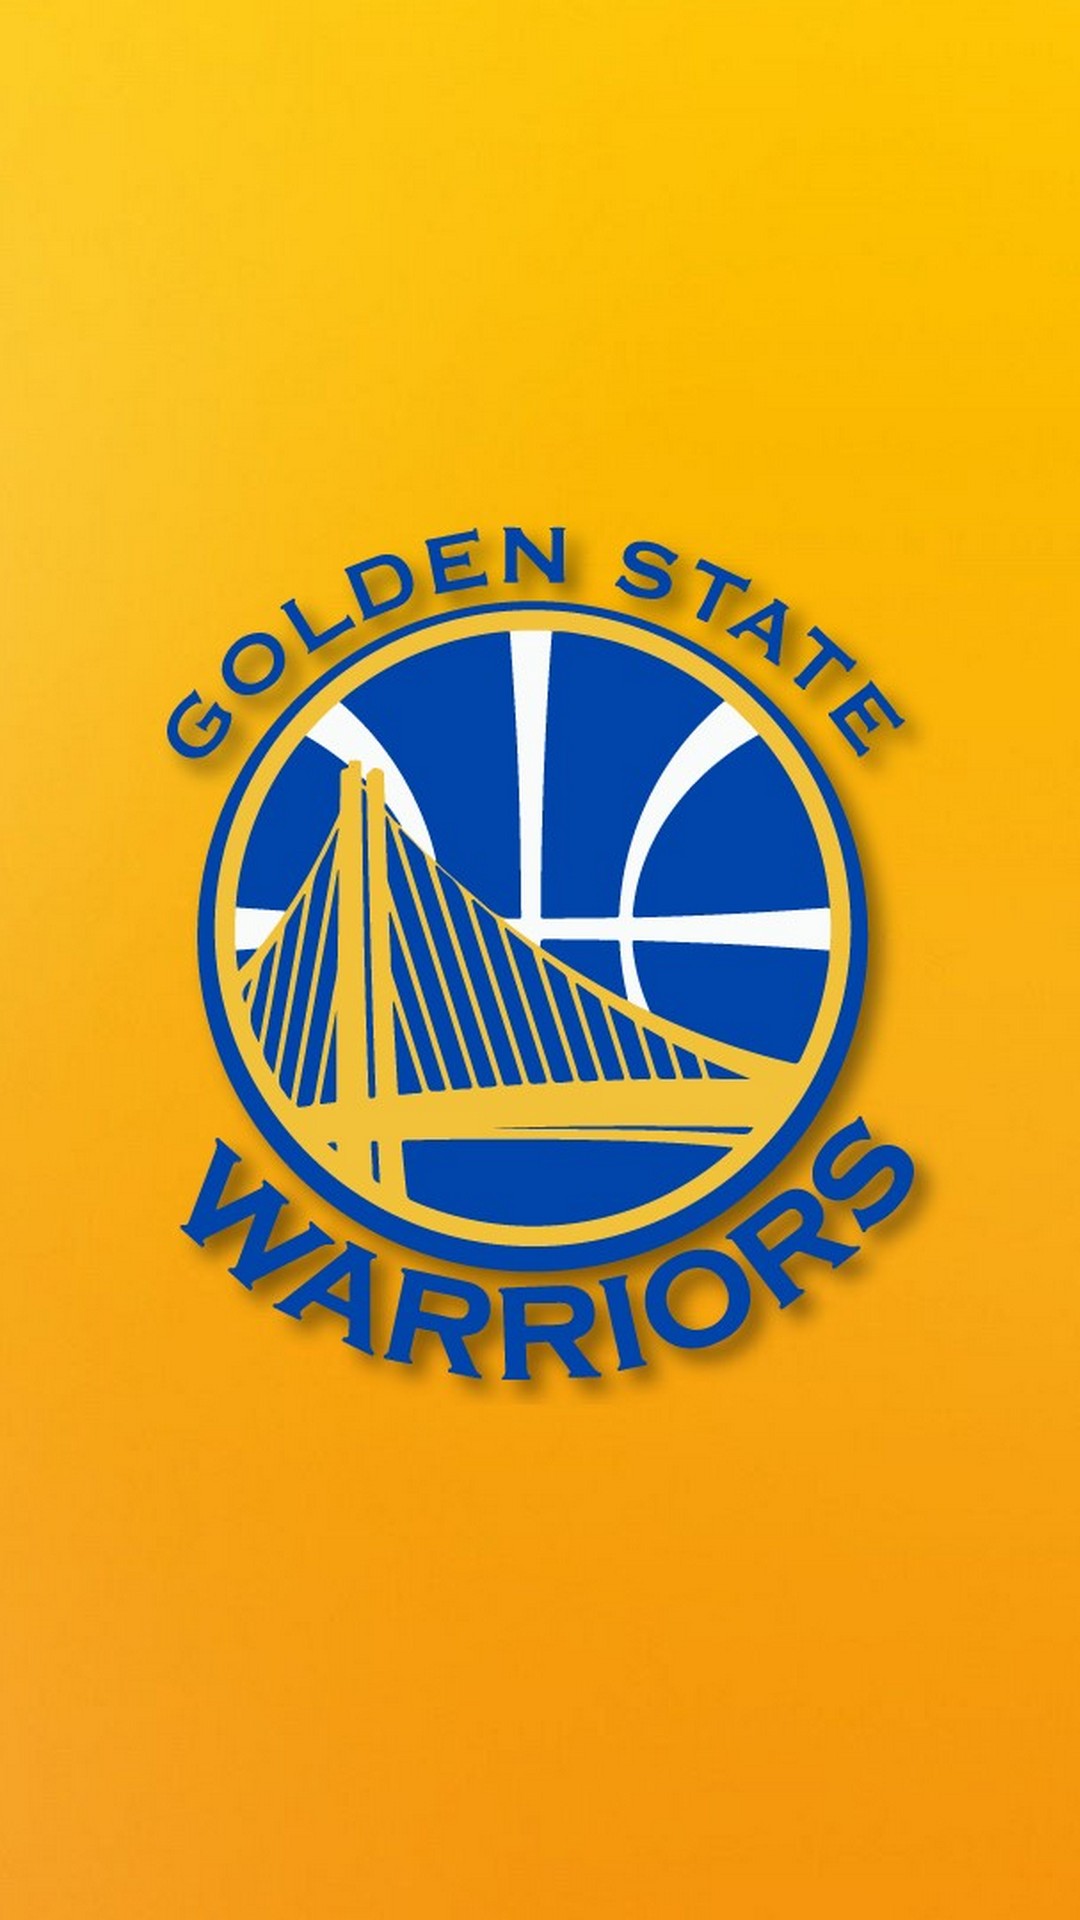 Wallpaper Golden State Warriors Mobile with image dimensions 1080x1920 pixel. You can make this wallpaper for your Desktop Computer Backgrounds, Windows or Mac Screensavers, iPhone Lock screen, Tablet or Android and another Mobile Phone device